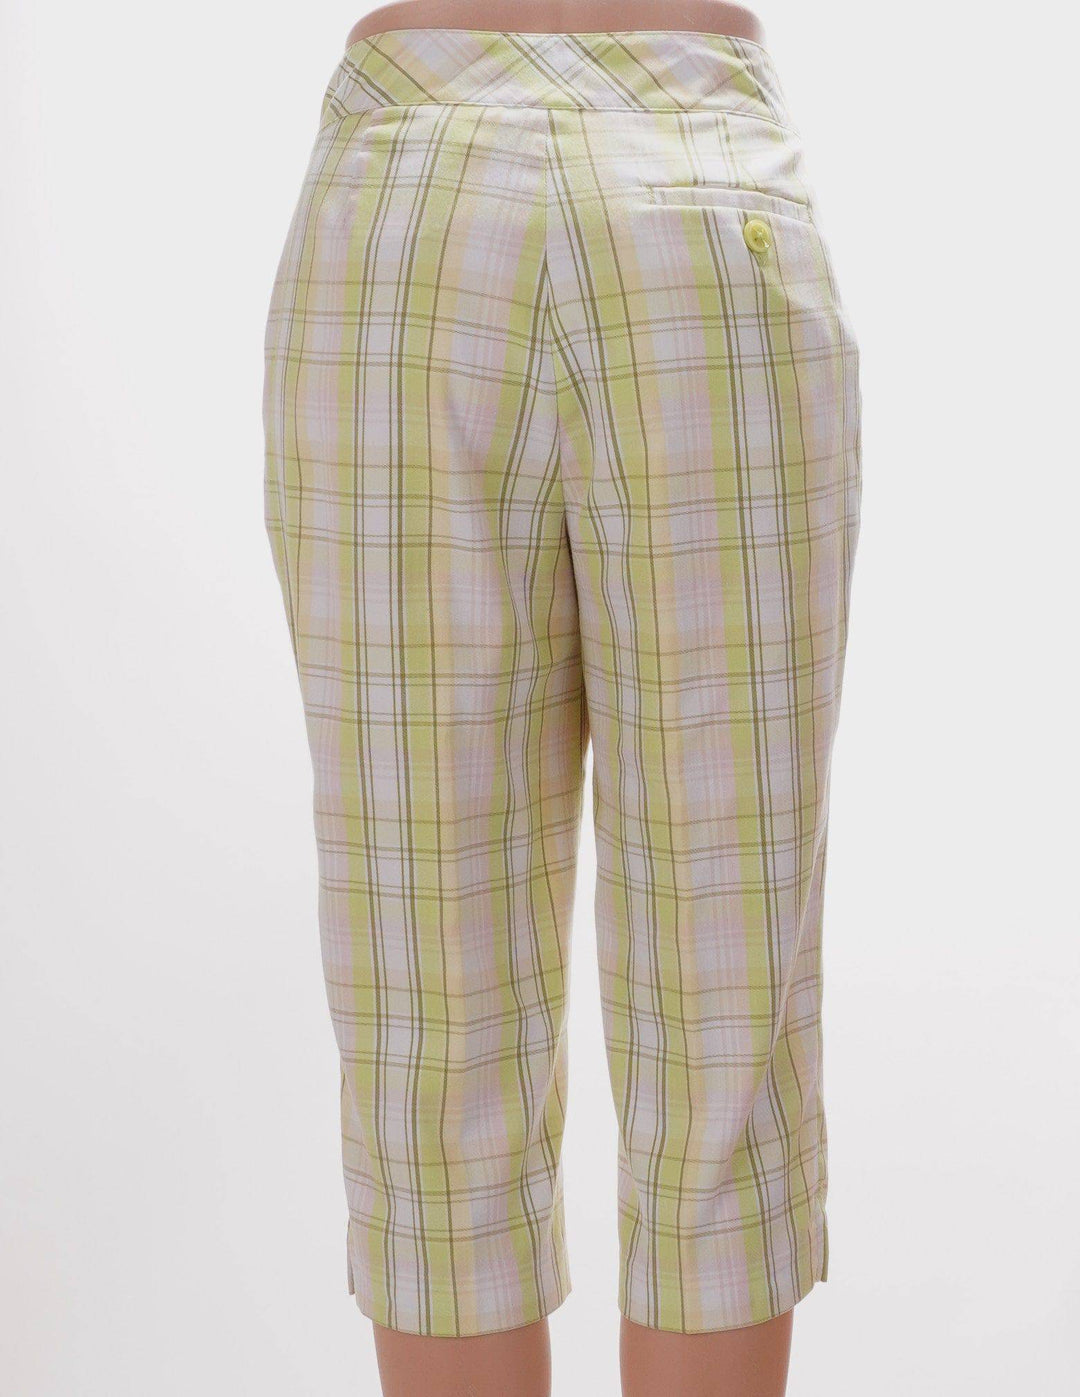 EP Pro Lime Green / 4 / Consigned EP Pro - Lime Green Plaid - Size 4